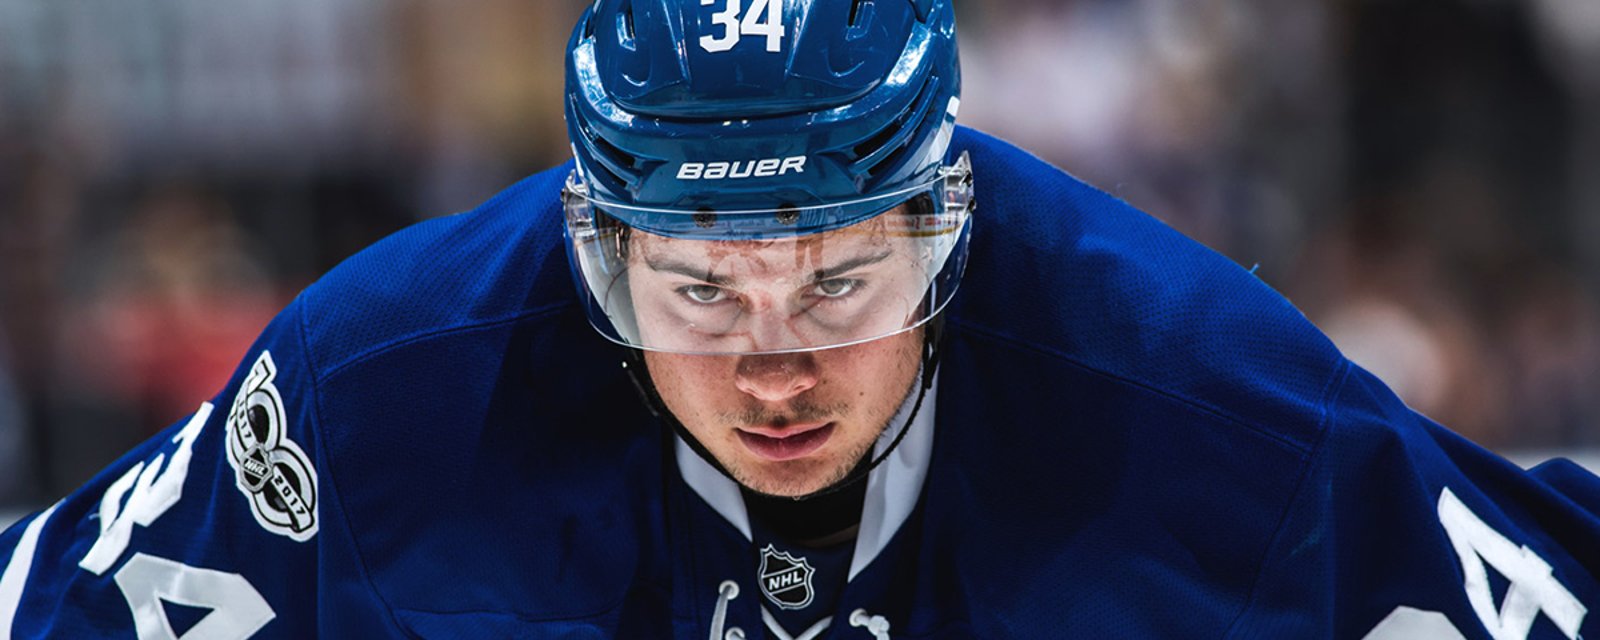 Rumor: Leafs ready to give Matthews the “C”?